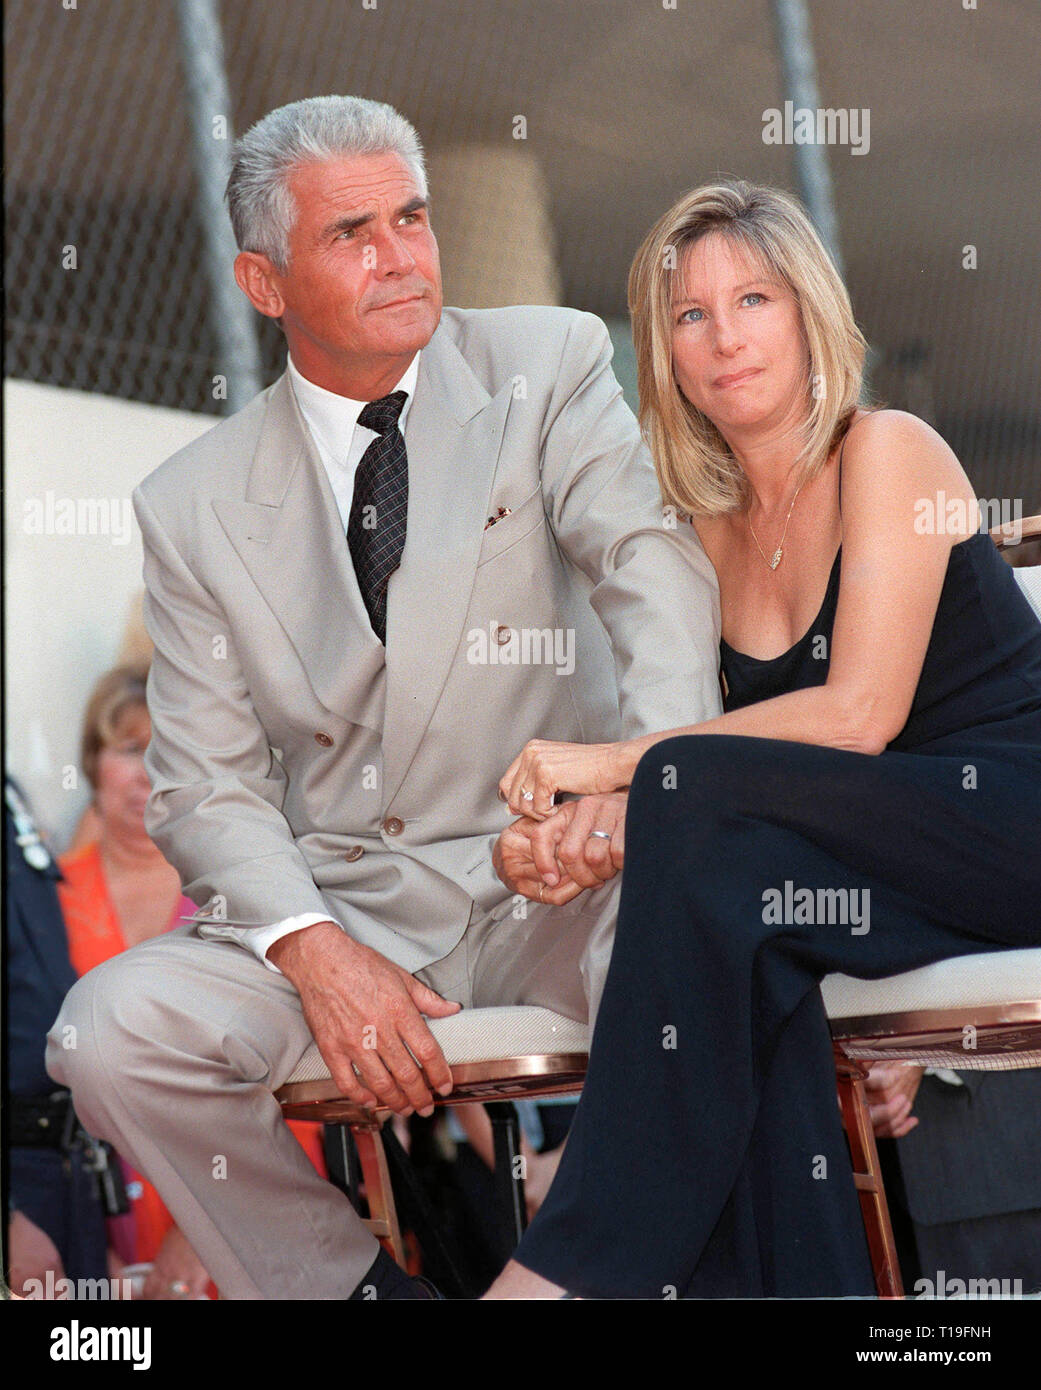 LOS ANGELES, CA - August 27, 1998: Actor JAMES BROLIN with actress/director wife BARBRA STREISAND in Hollywood where he was honored with the 2115th star on the Hollywood Walk of Fame. Stock Photo